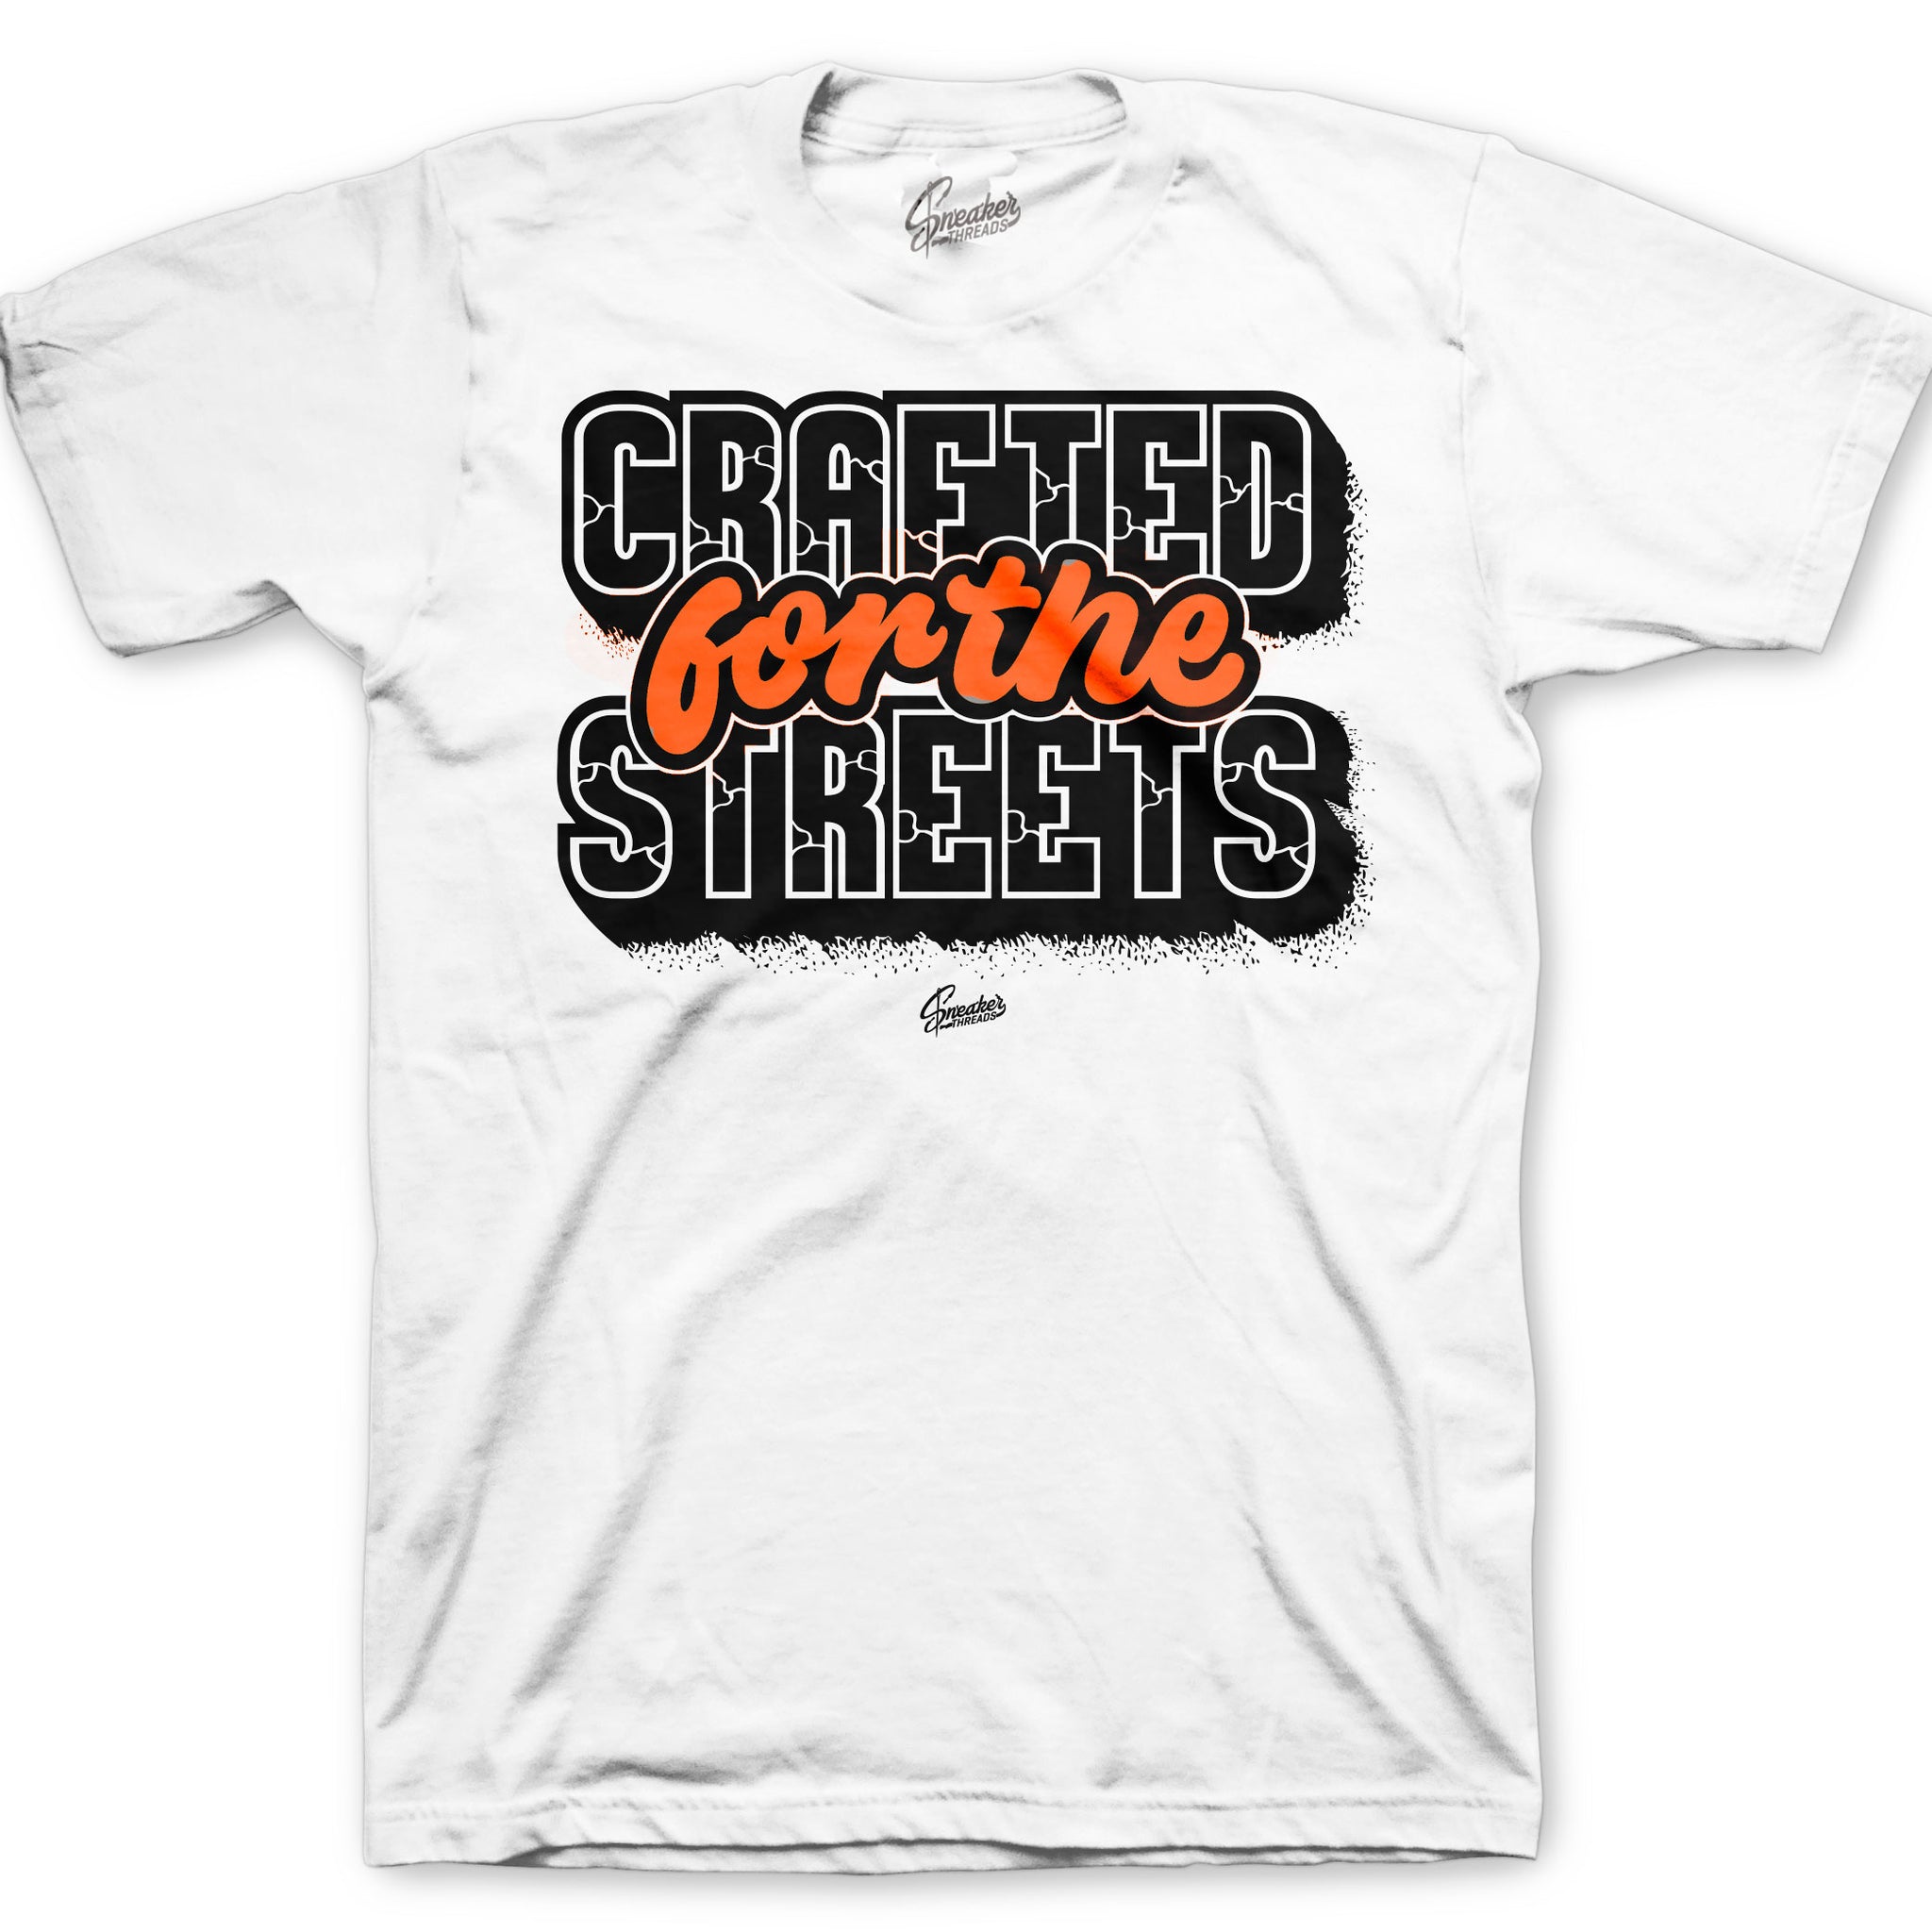 Crafted tee to match Foams Shattered Backboard